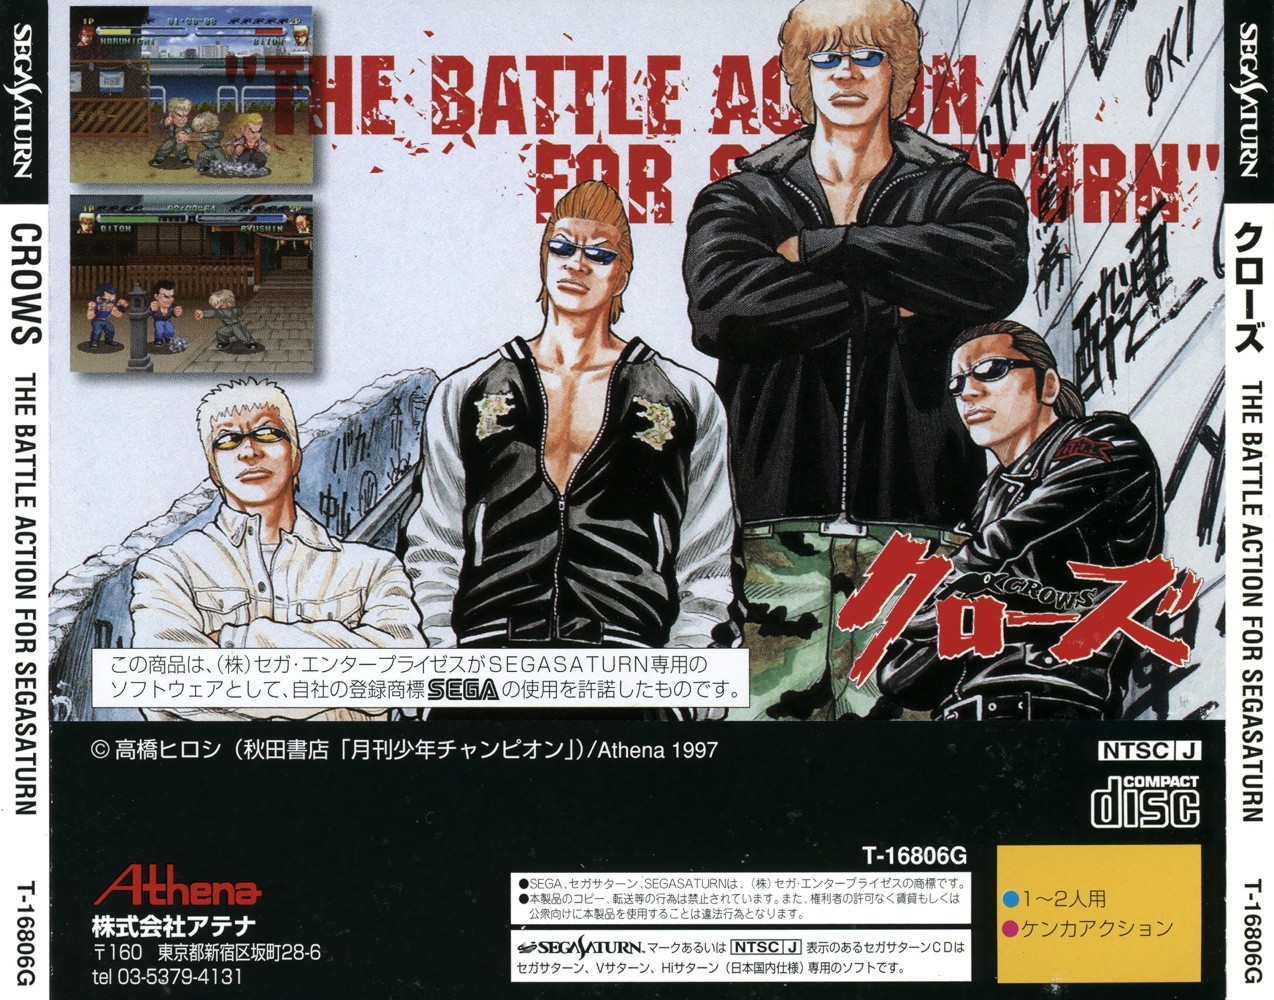 Crows: The Battle Action for SegaSaturn cover